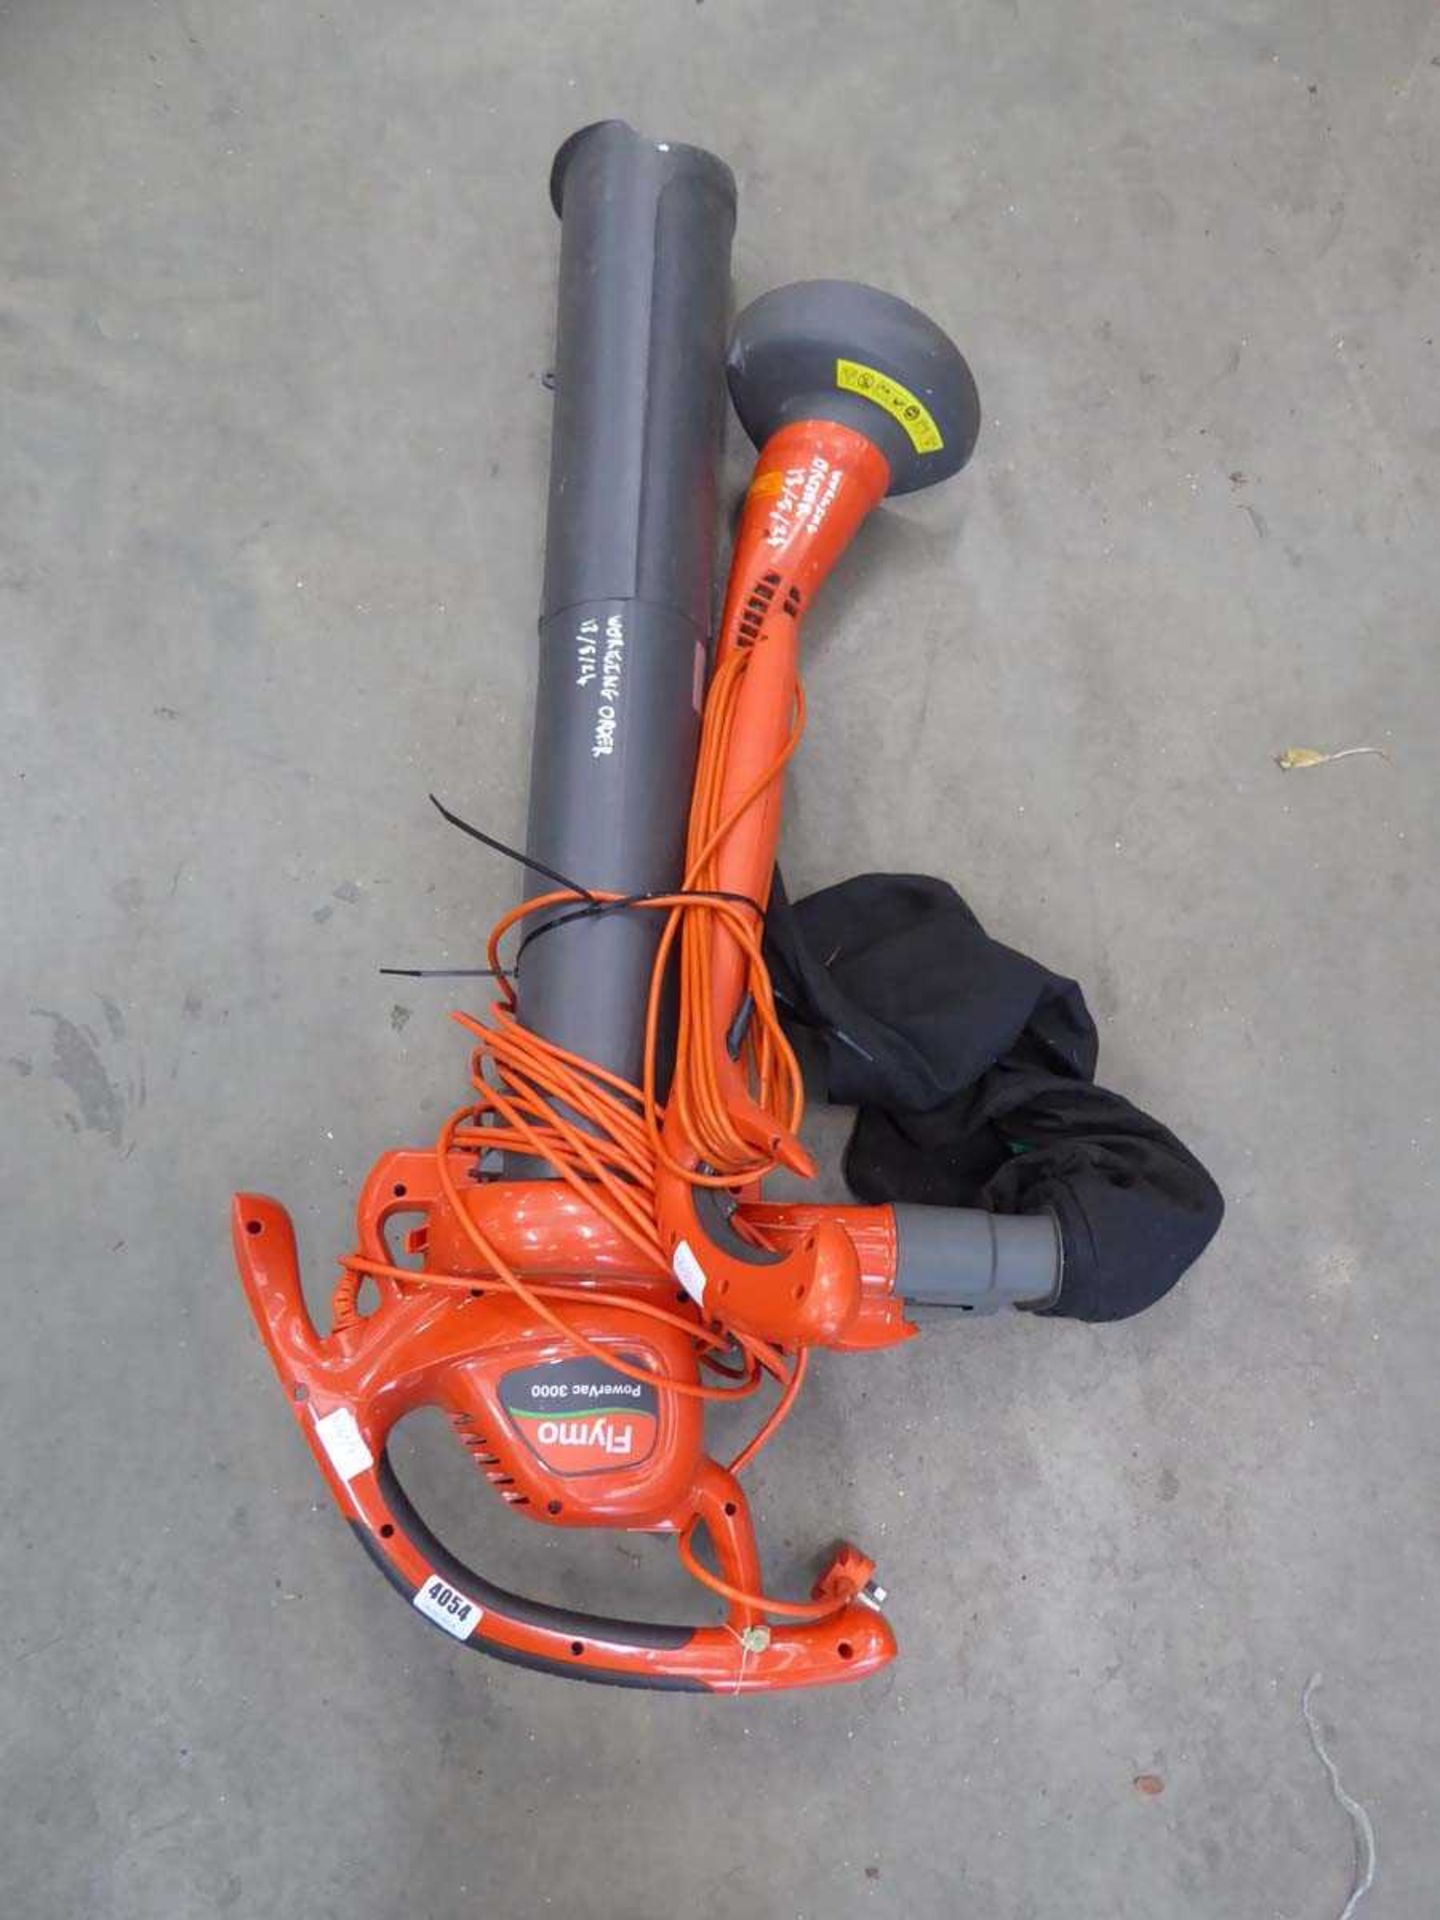 Flymo electric leaf blower and an electric strimmer